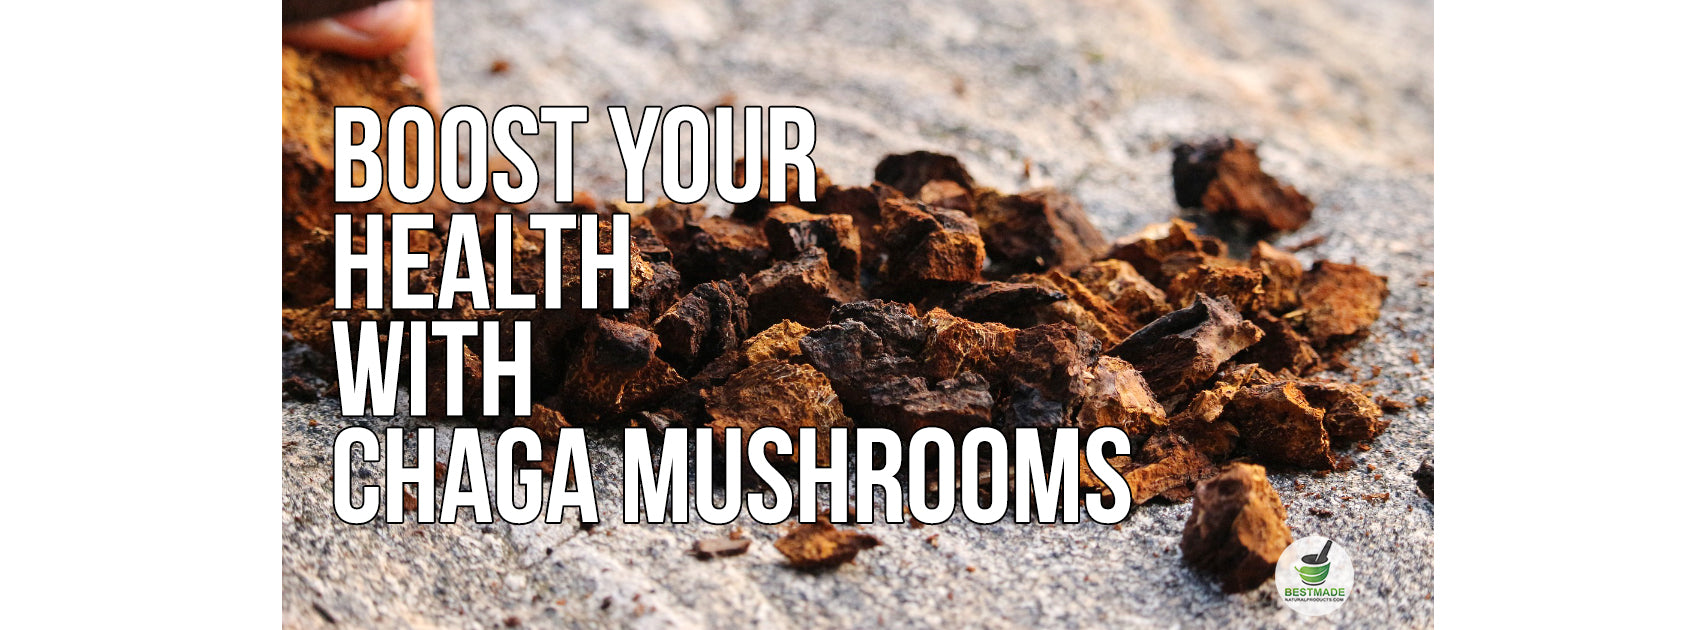 Boost Your Health With Using Chaga Mushrooms